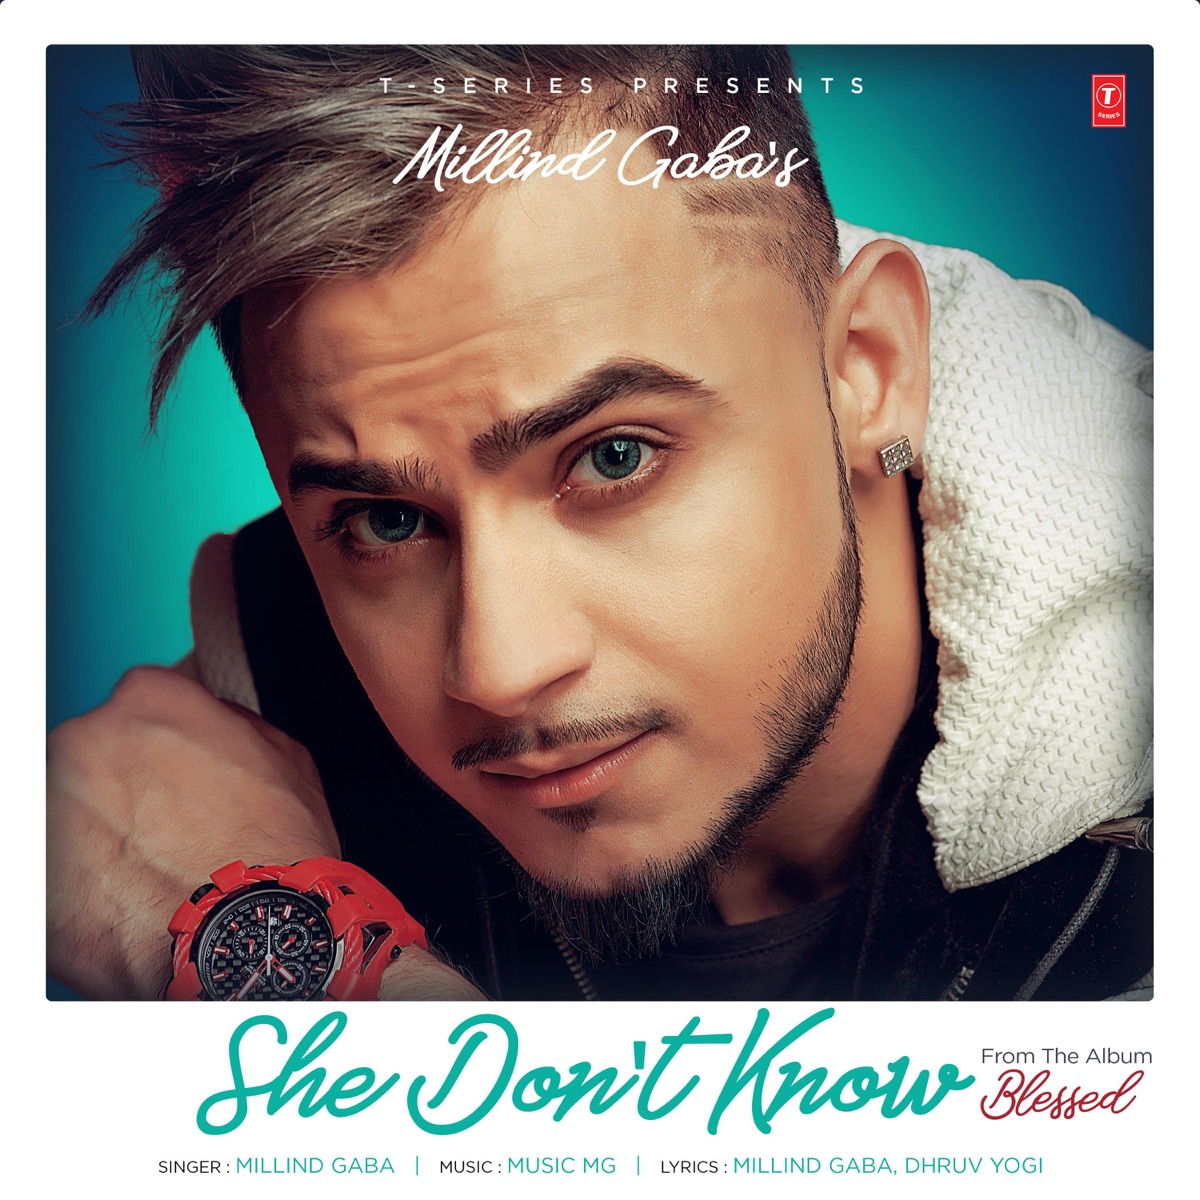 Sponsored - Millind Gaba And Parampara Thakur's Party Anthem Kya Karu,  Featuring Ashnoor Kaur, Is Out Now